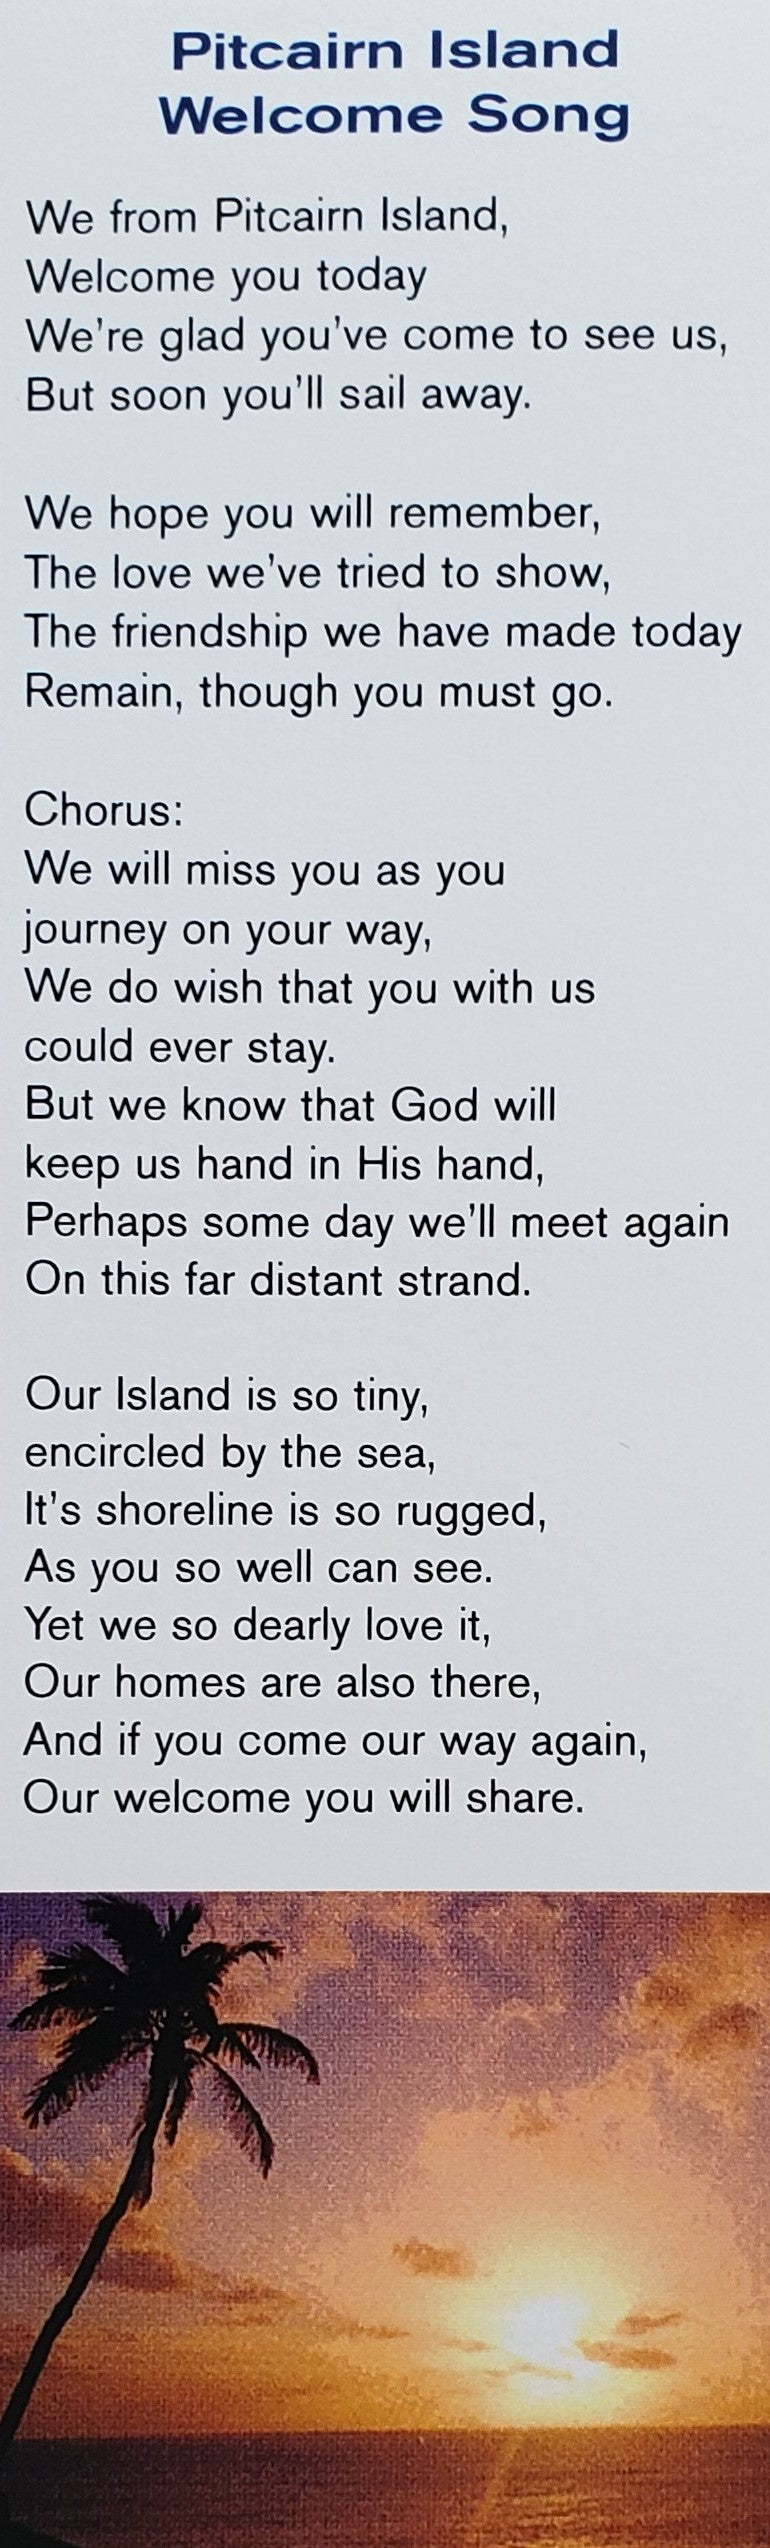 Bookmark - Pitcairn Island Welcome Song  - Card Stock